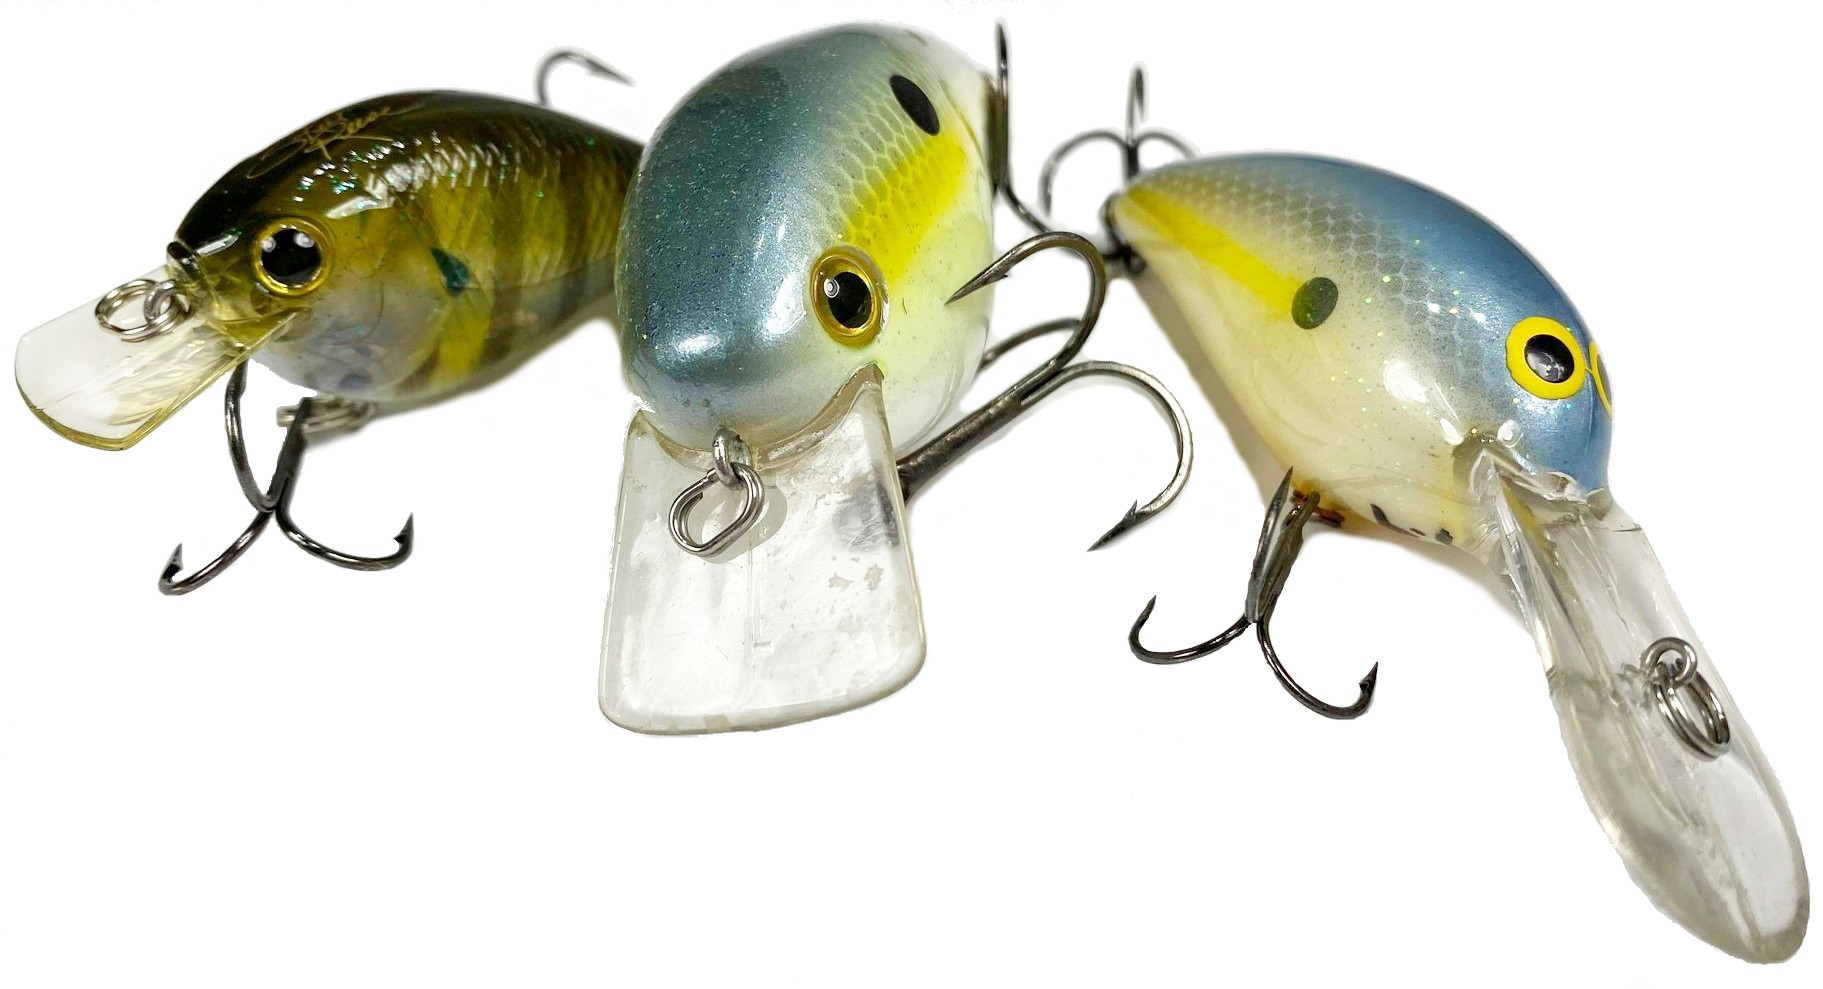 10 x For Real Assorted Shad Lures Soft Bait Fishing Shads Single Treble Hooks